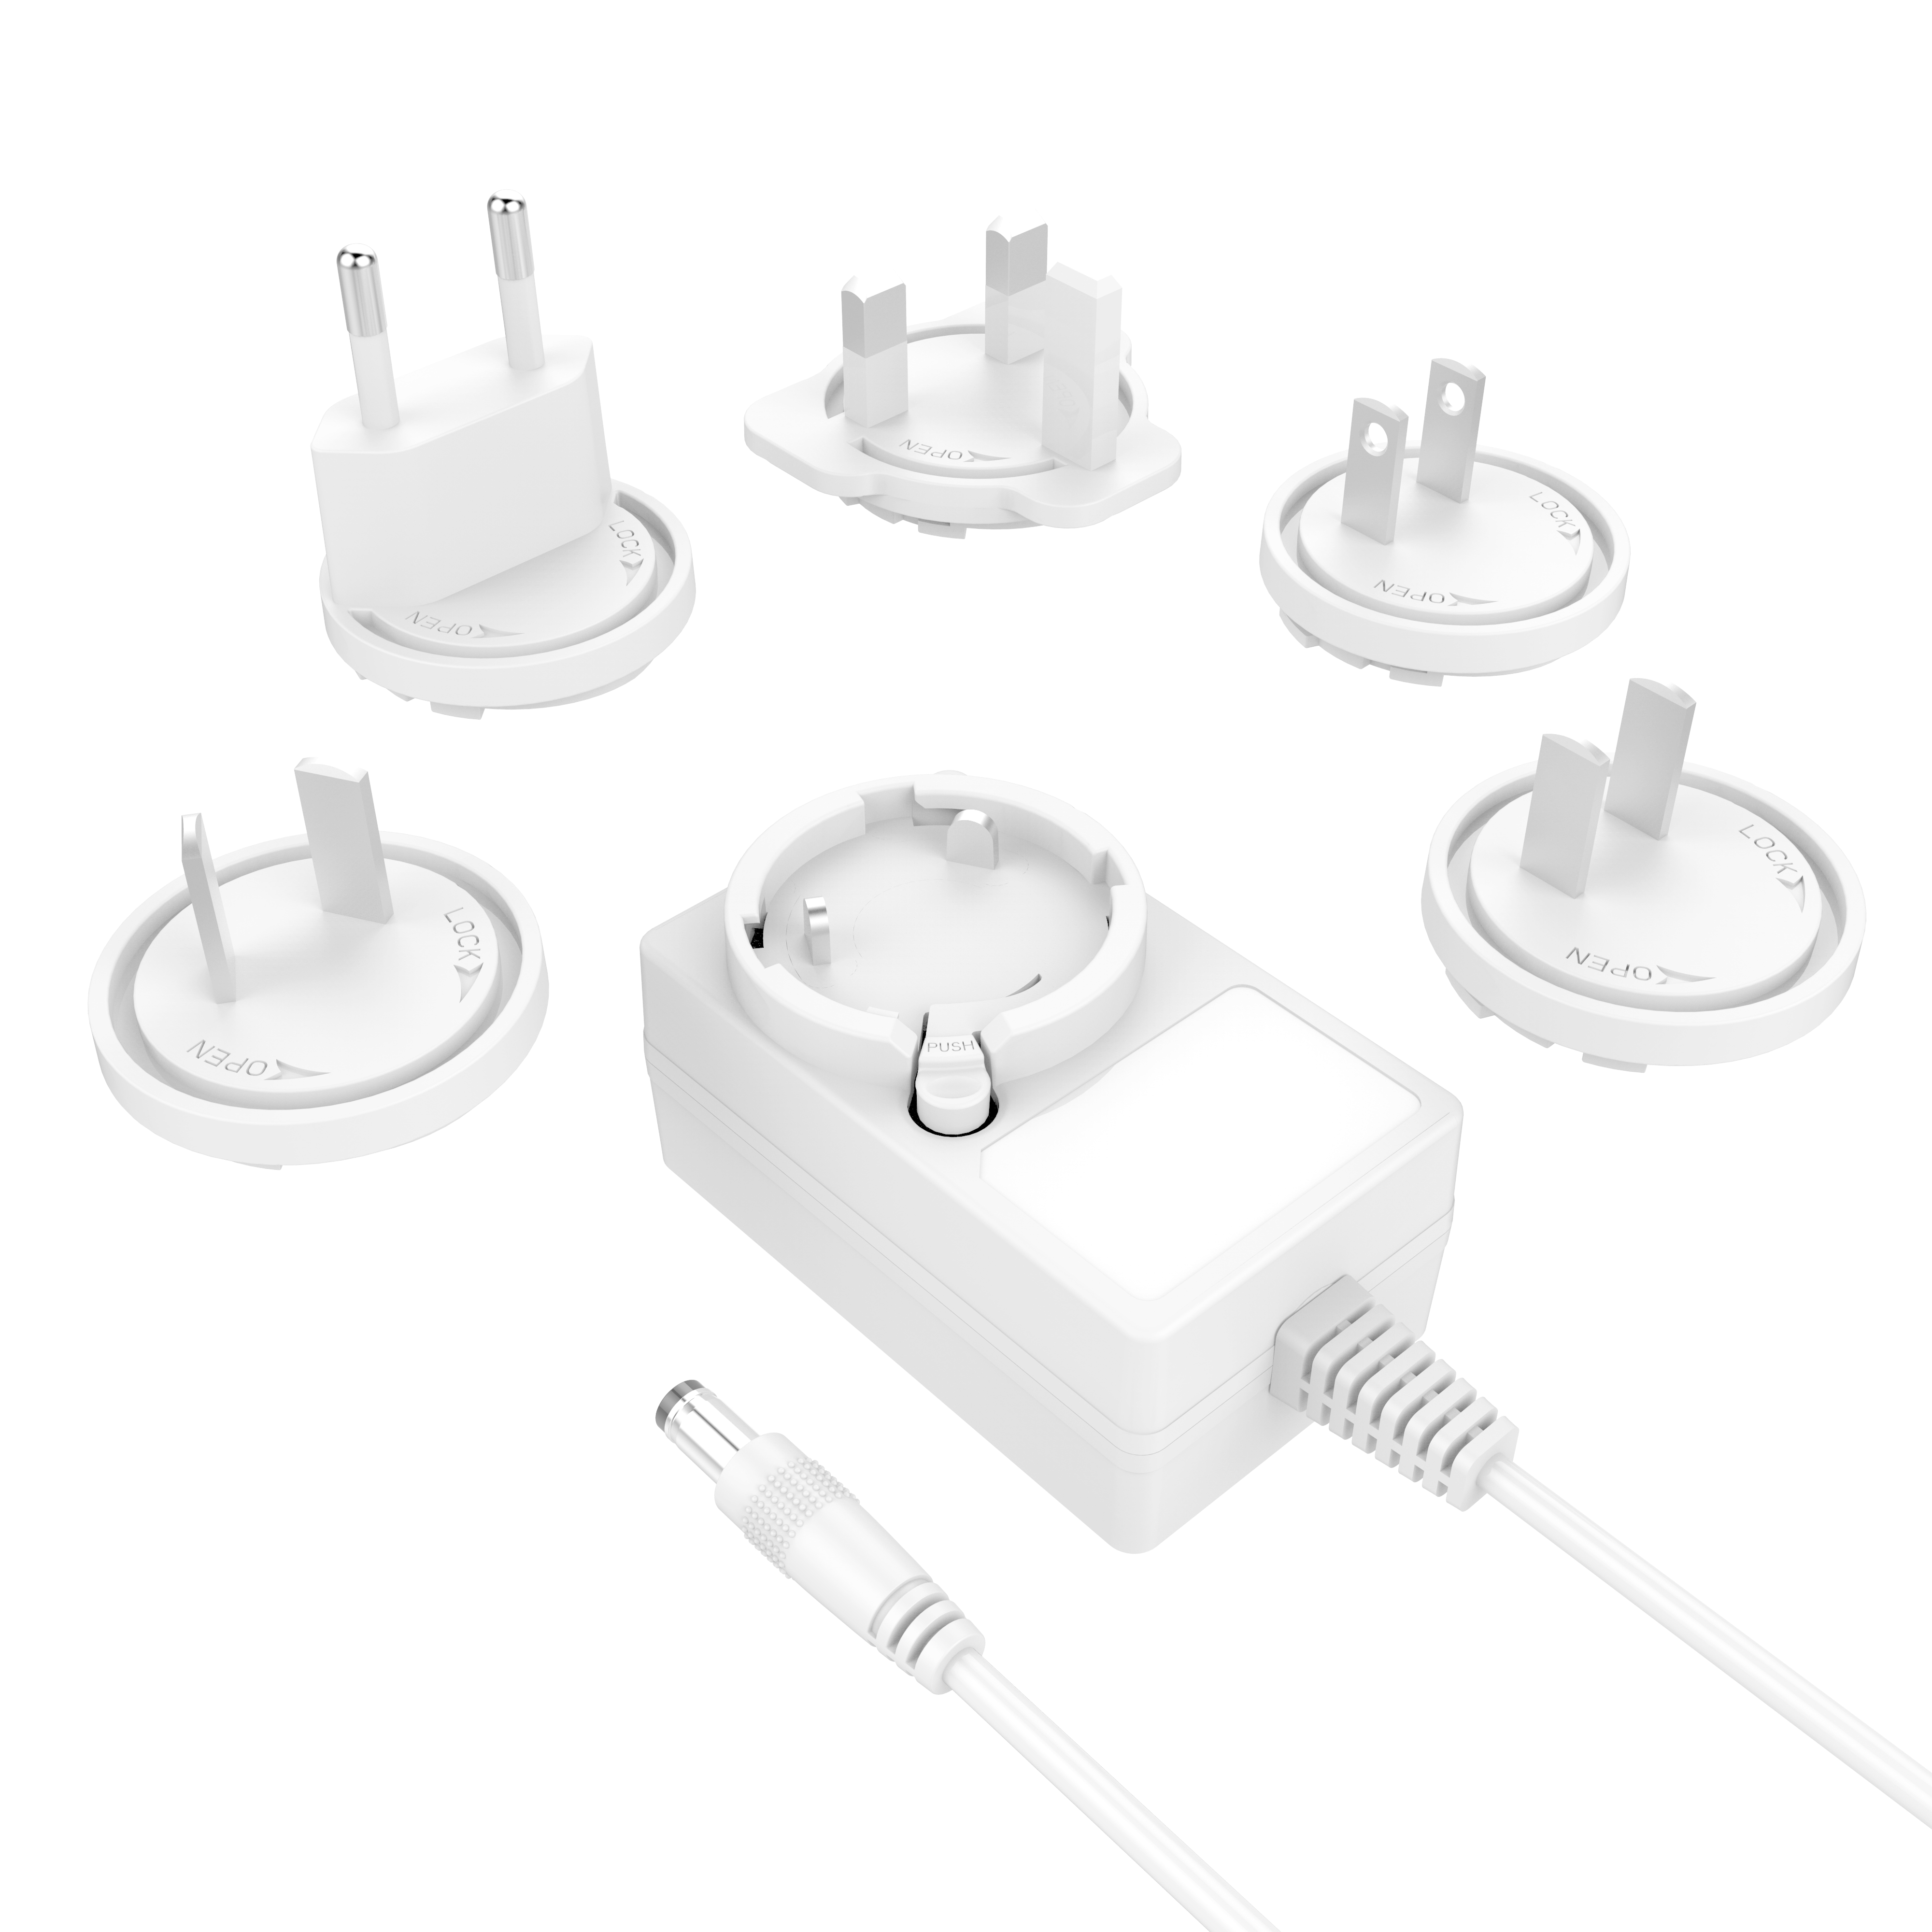 9V 2A wall plug power adapter 5V 3.5A 3A removeable adapter with UL62368 ETL1310 EN61558/62368 CE GS SAA PSE KC